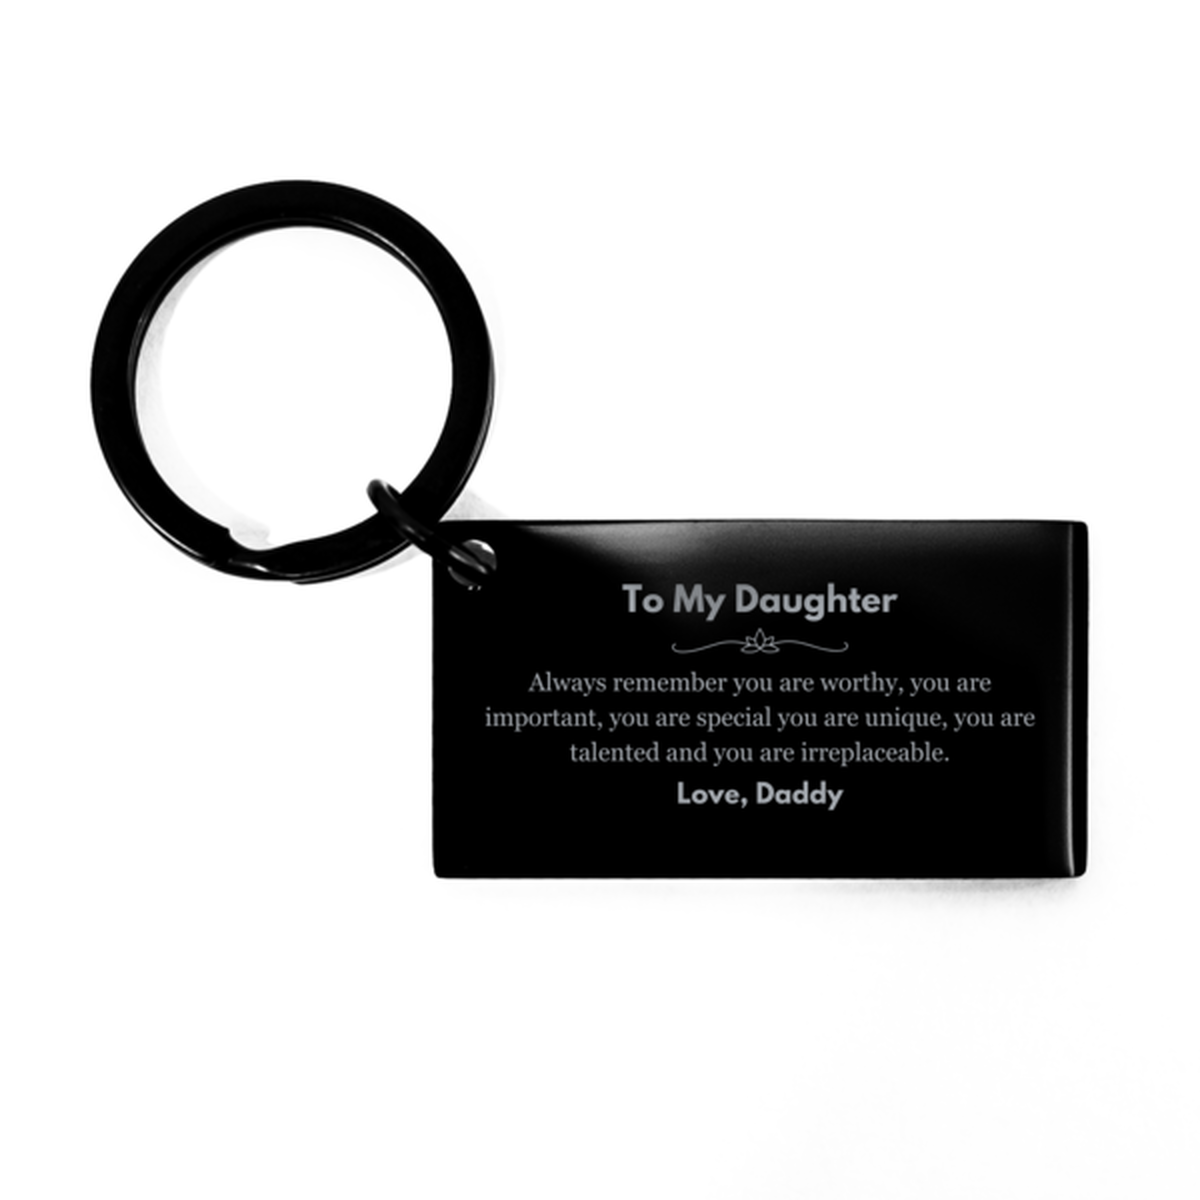 Daughter Birthday Gifts from Daddy, Inspirational Keychain for Daughter Christmas Graduation Gifts for Daughter Always remember you are worthy, you are important. Love, Daddy